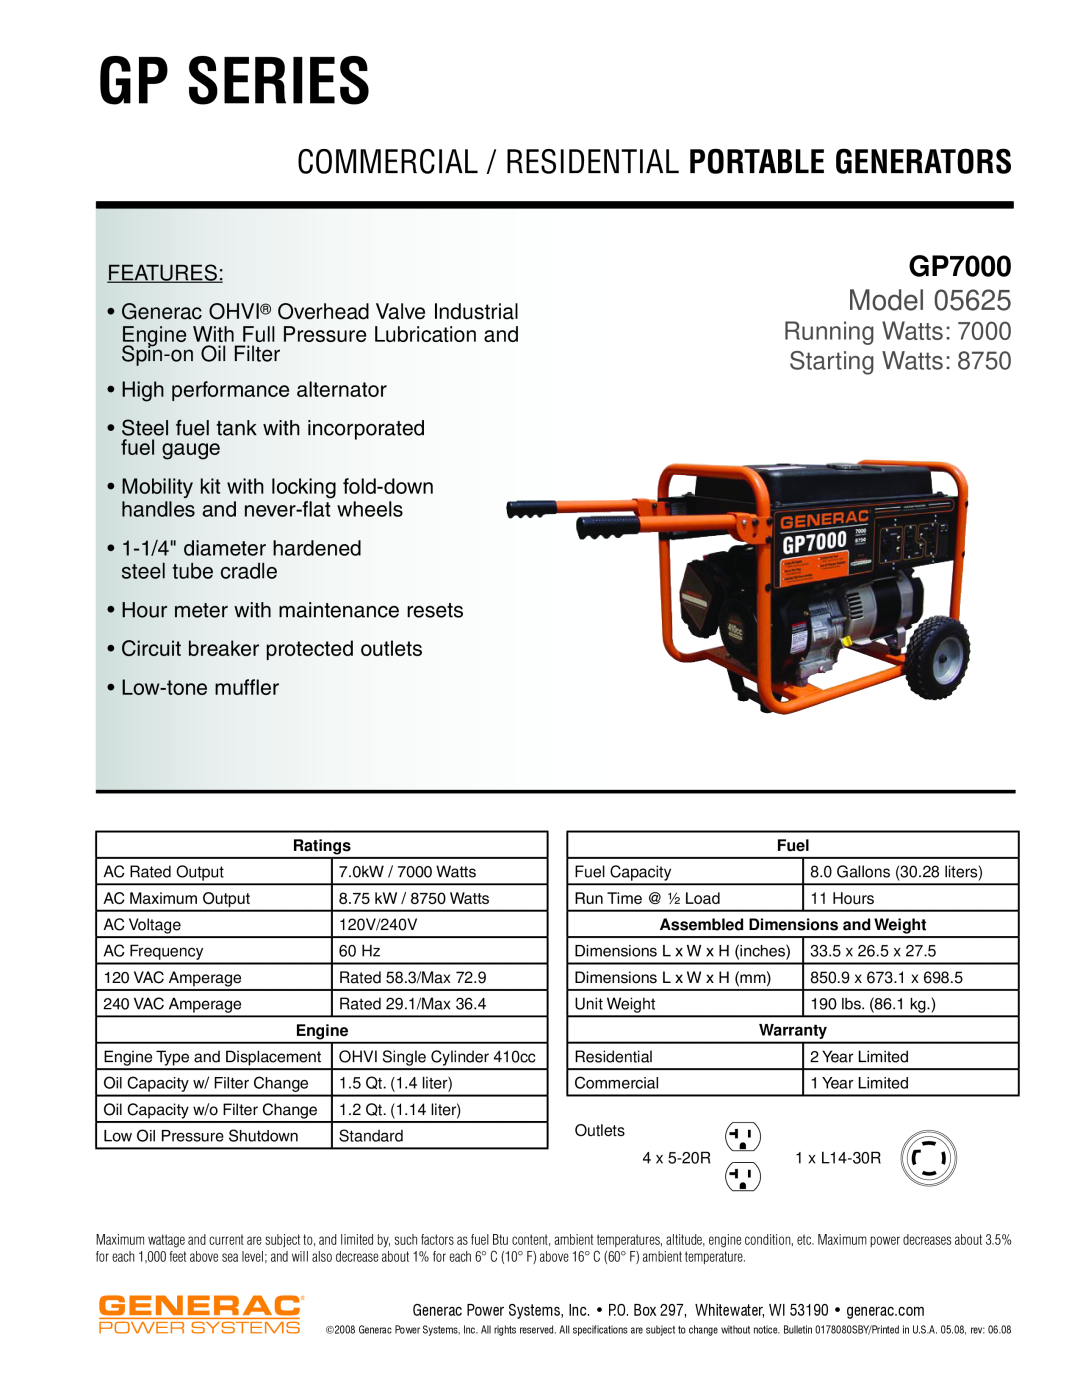 Generac Power Systems GP7000 dimensions Gp Series, Commercial / Residential Portable Generators, Model, FEATURes, Ratings 